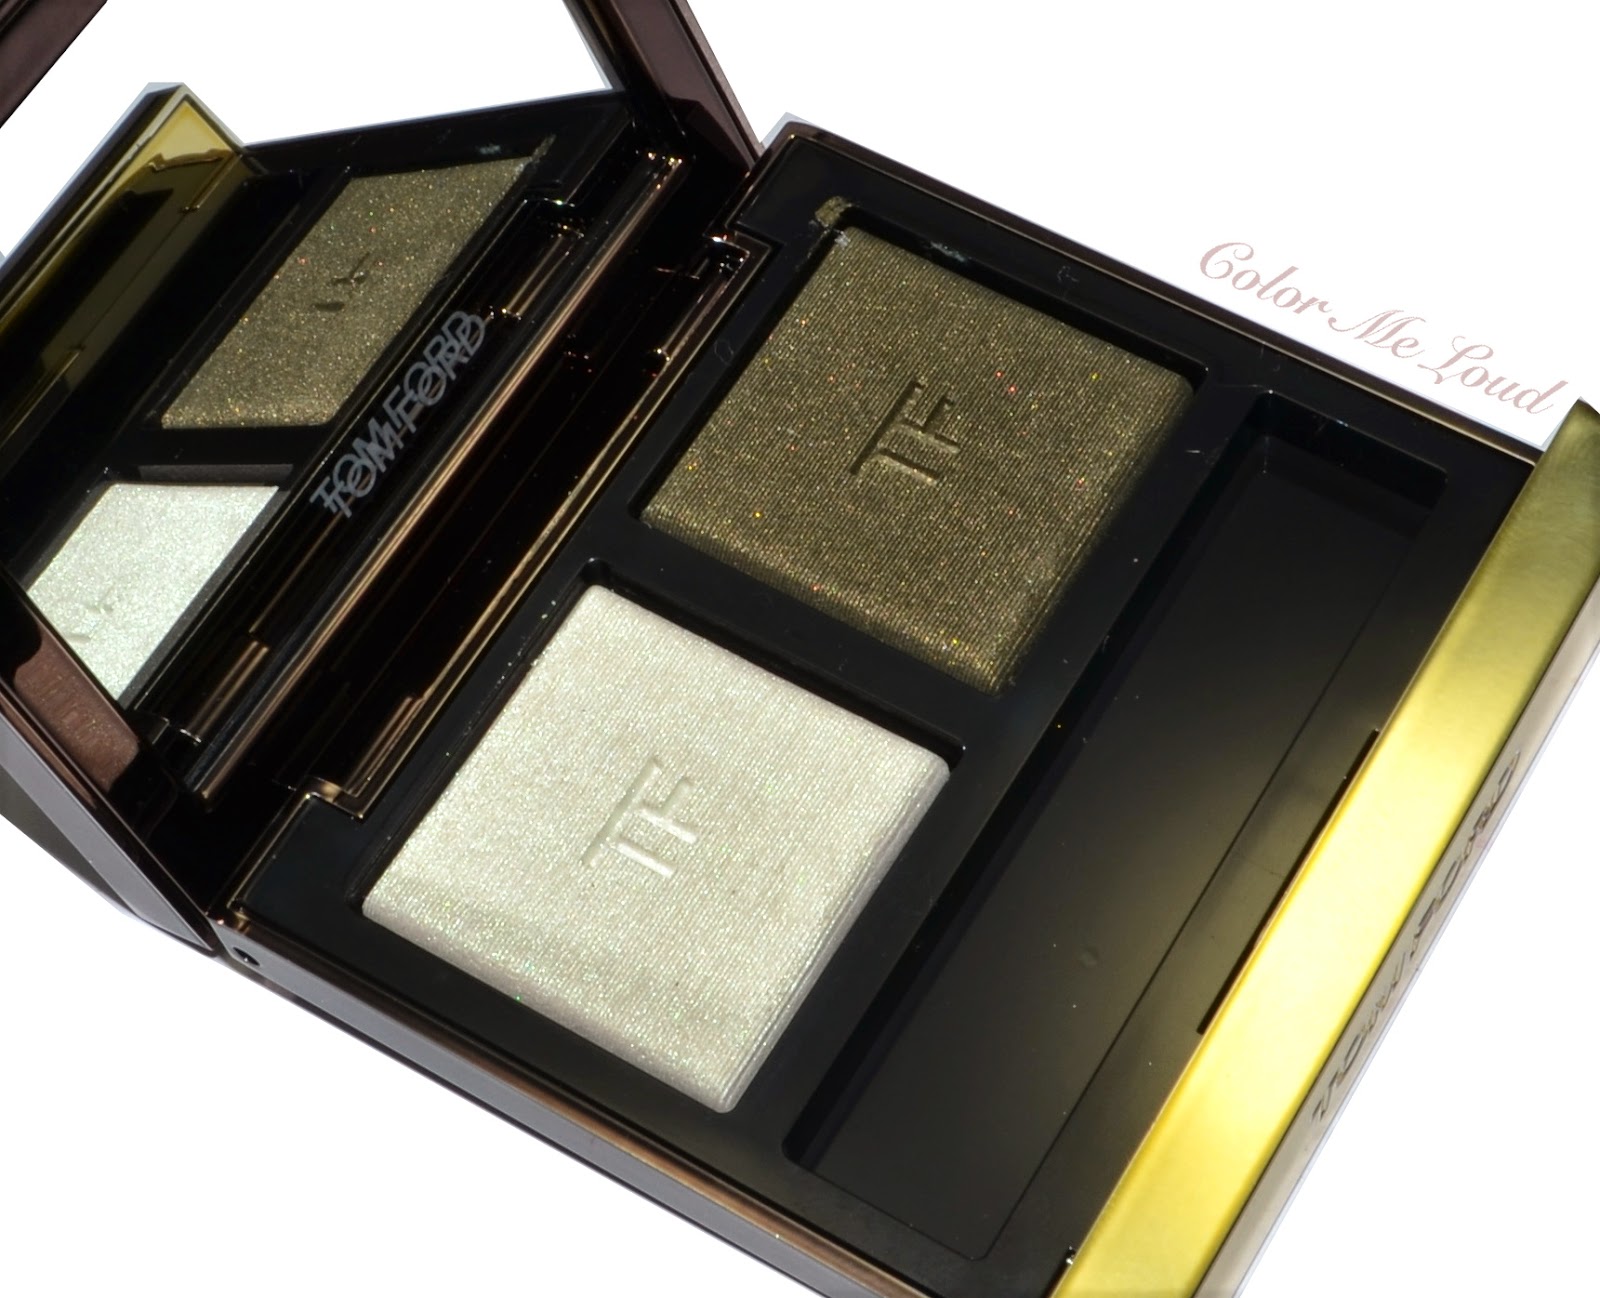 Tom Ford Eye Color Duo #02 Raw Jade, Review, Swatch, FOTD & Comparisons, for Spring 2015